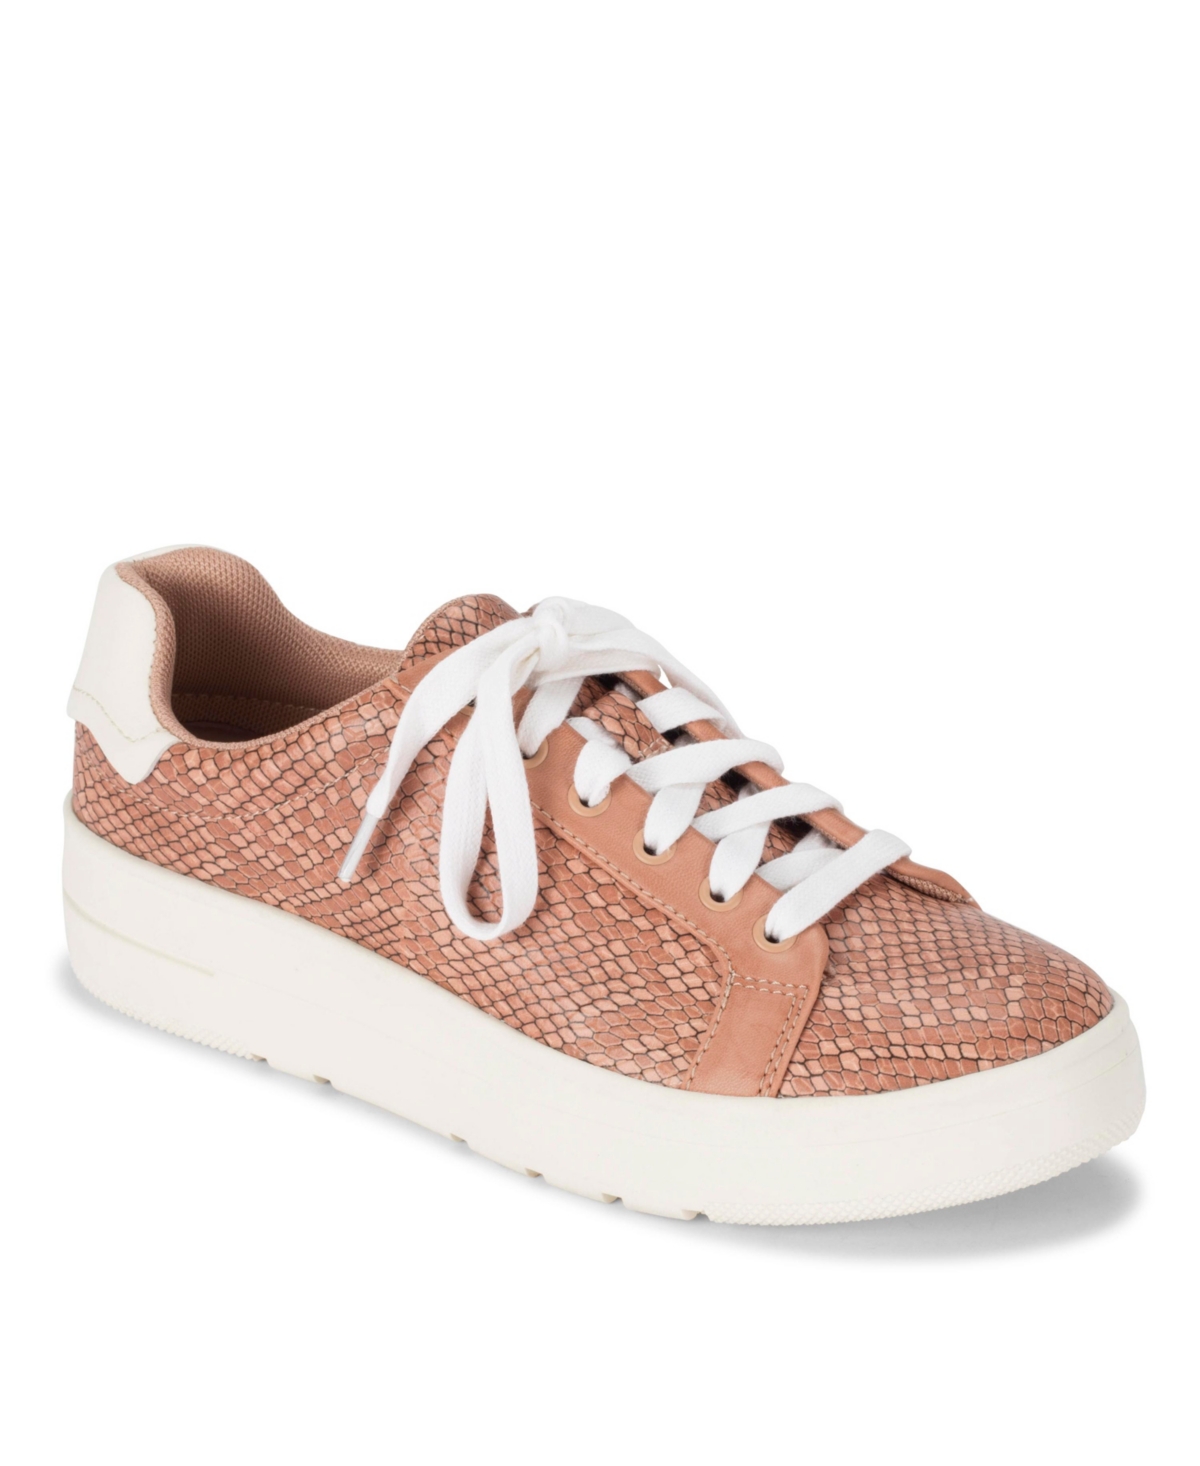 Women's Nishelle Casual Lace Up Sneakers - Soft Pink